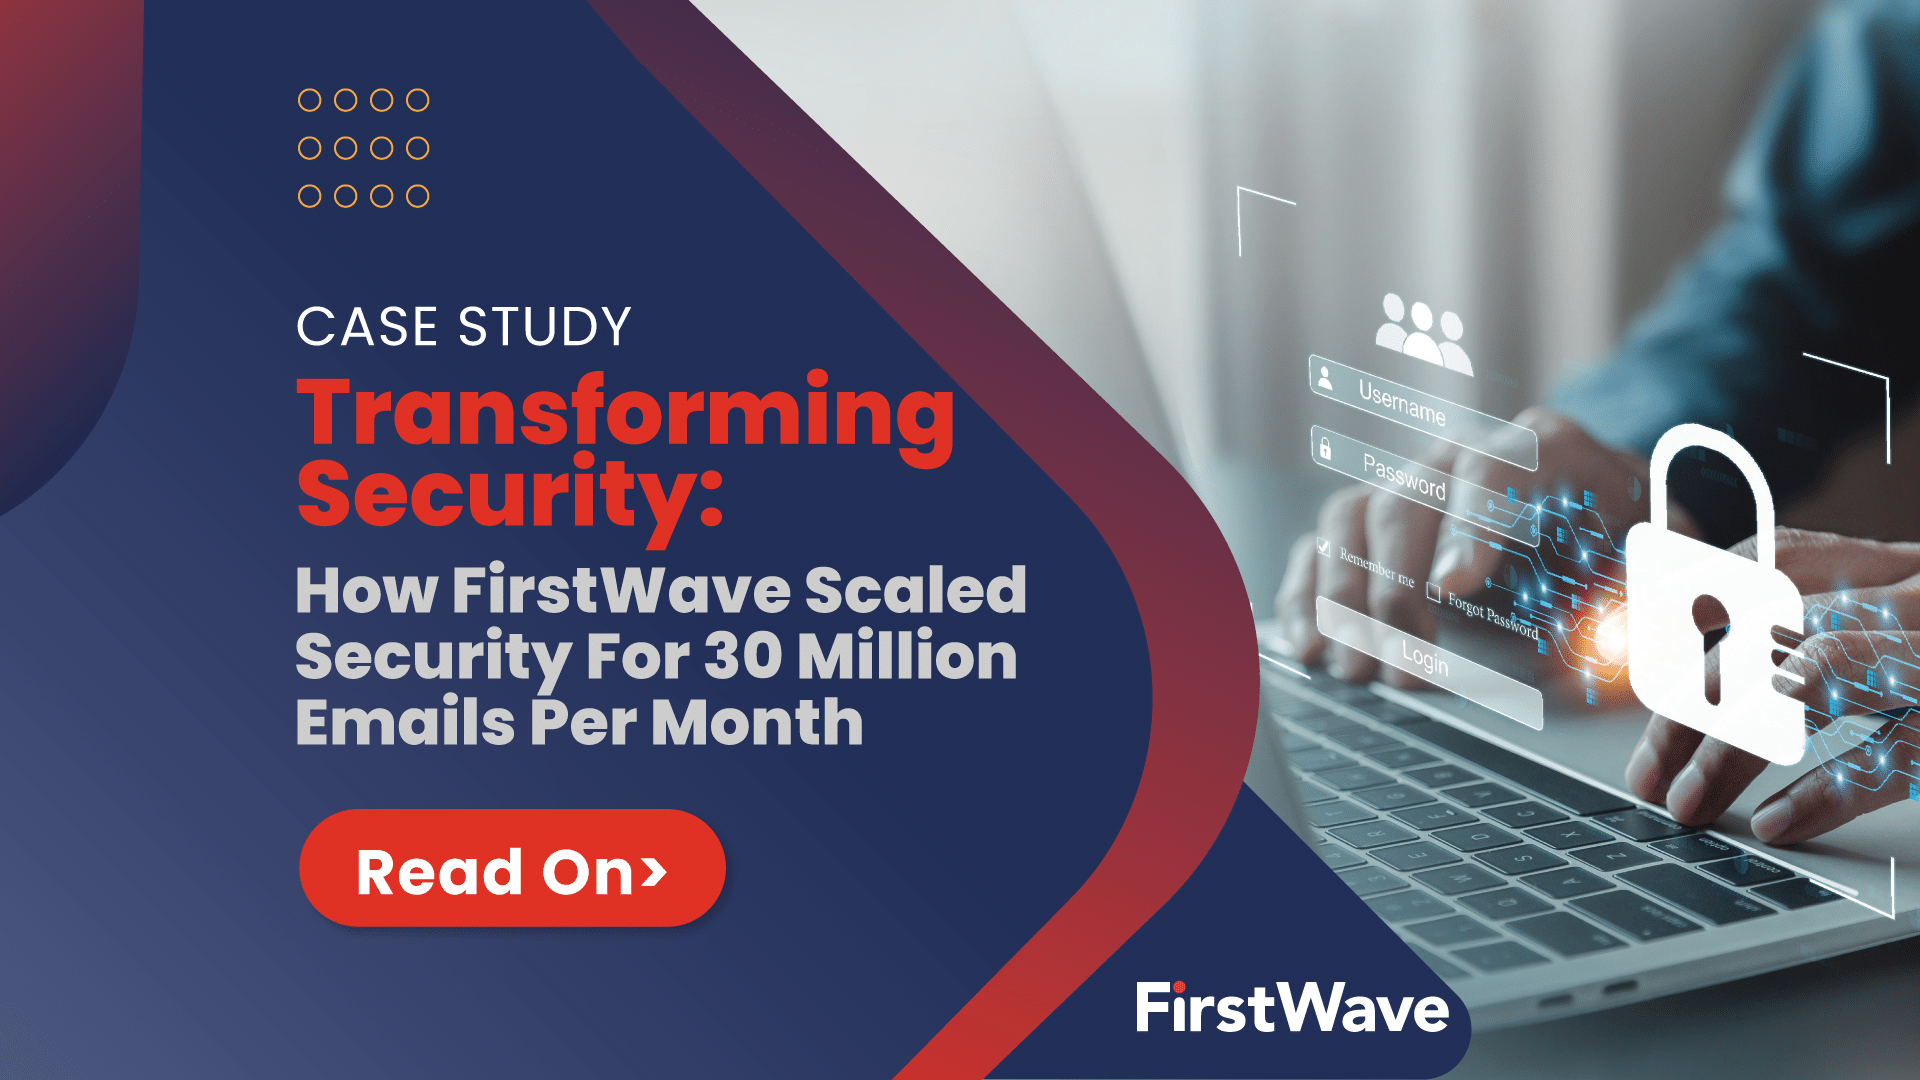 [Case Study] Cost-Effective, Scalable Security For 30 Million